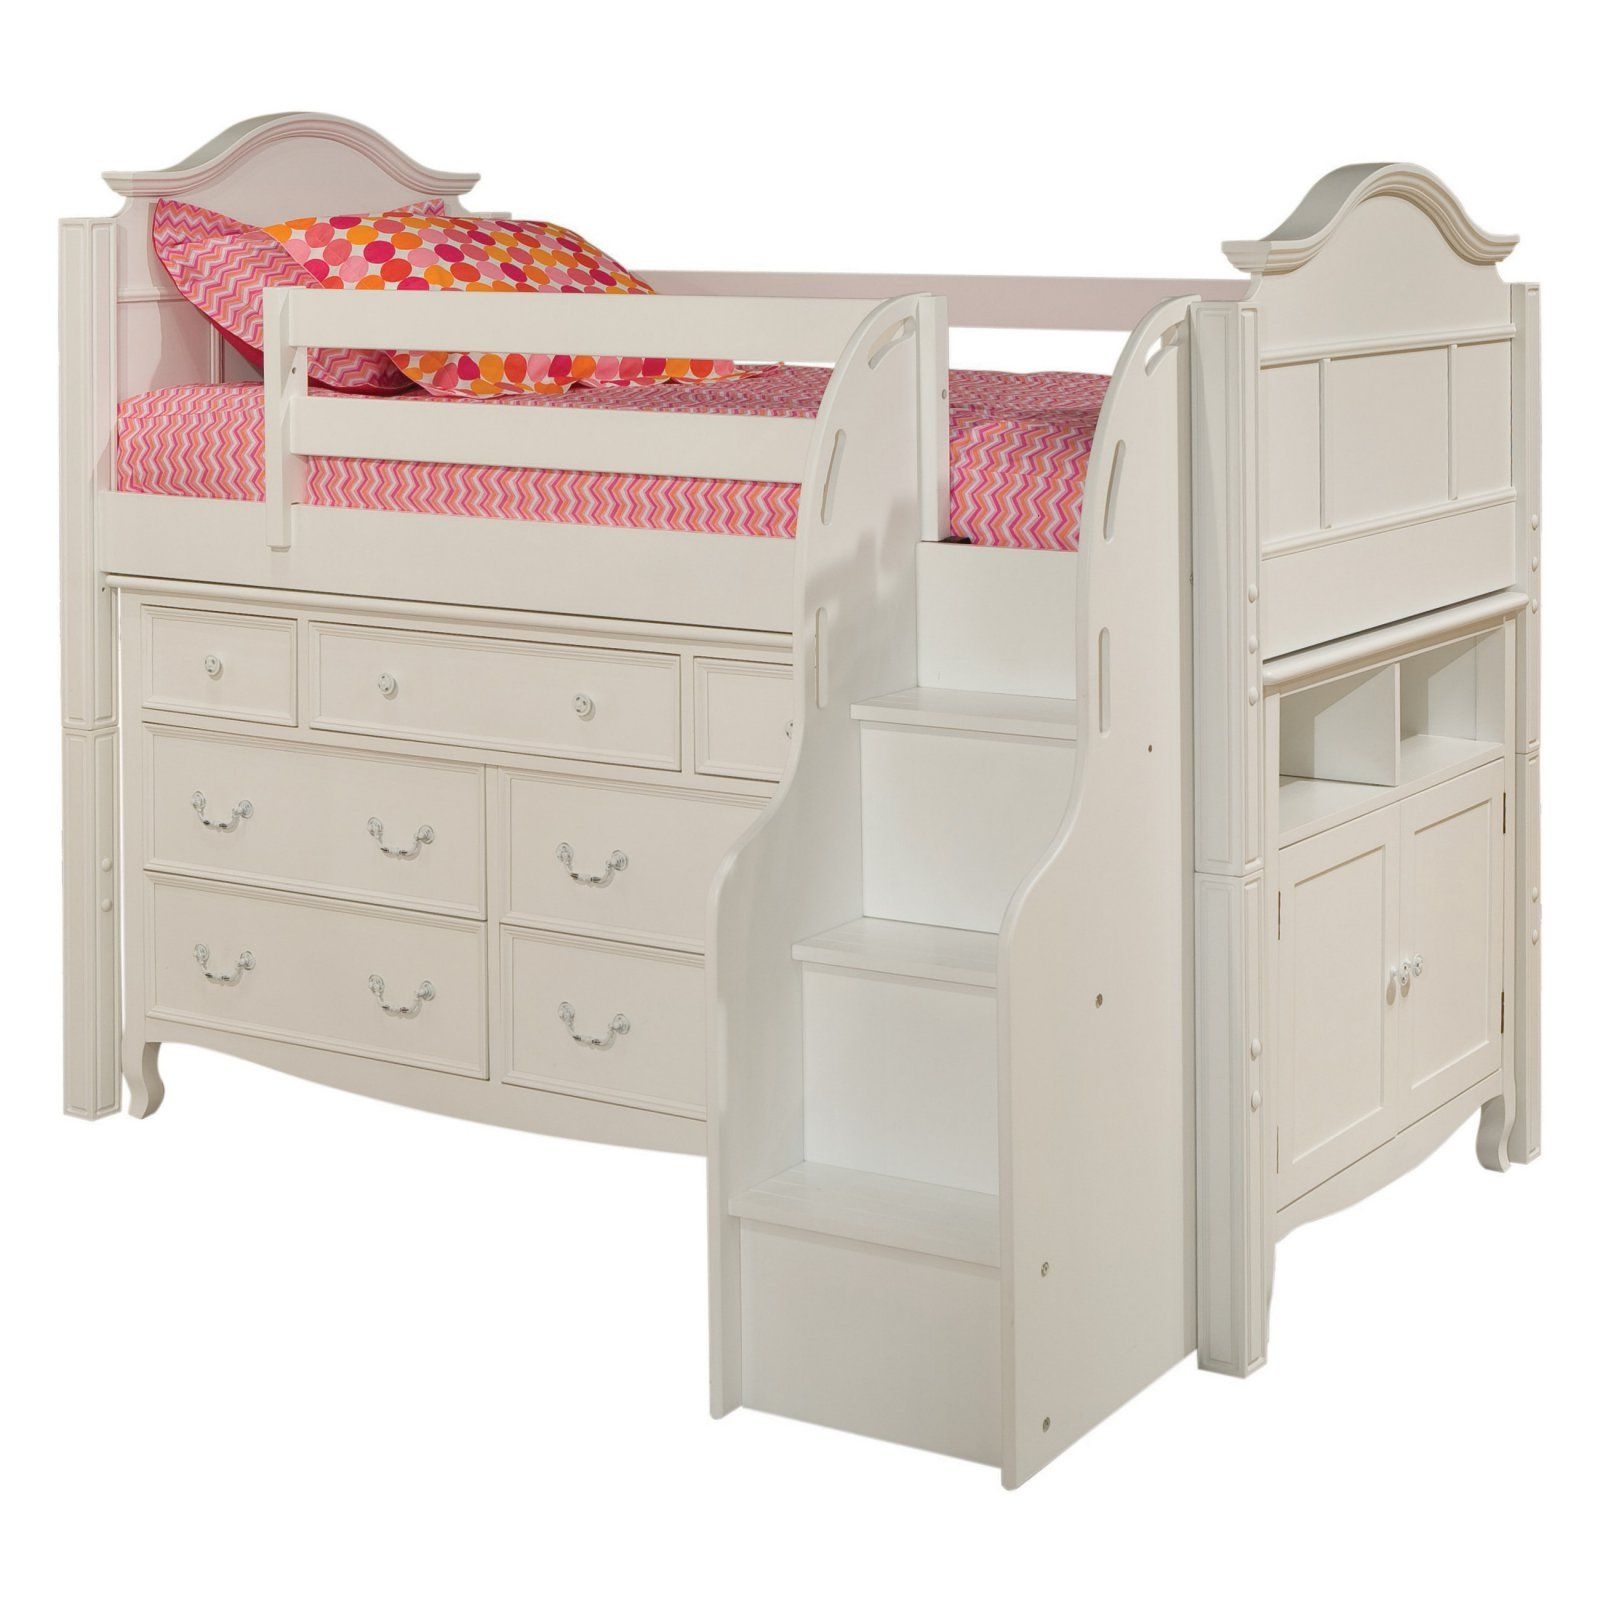 Bolton Furniture 9881500LS8320MSB Emma Low Loft Storage Bed with Stairs, 7 Drawer Dresser, Electronics Storage Cabinet, White